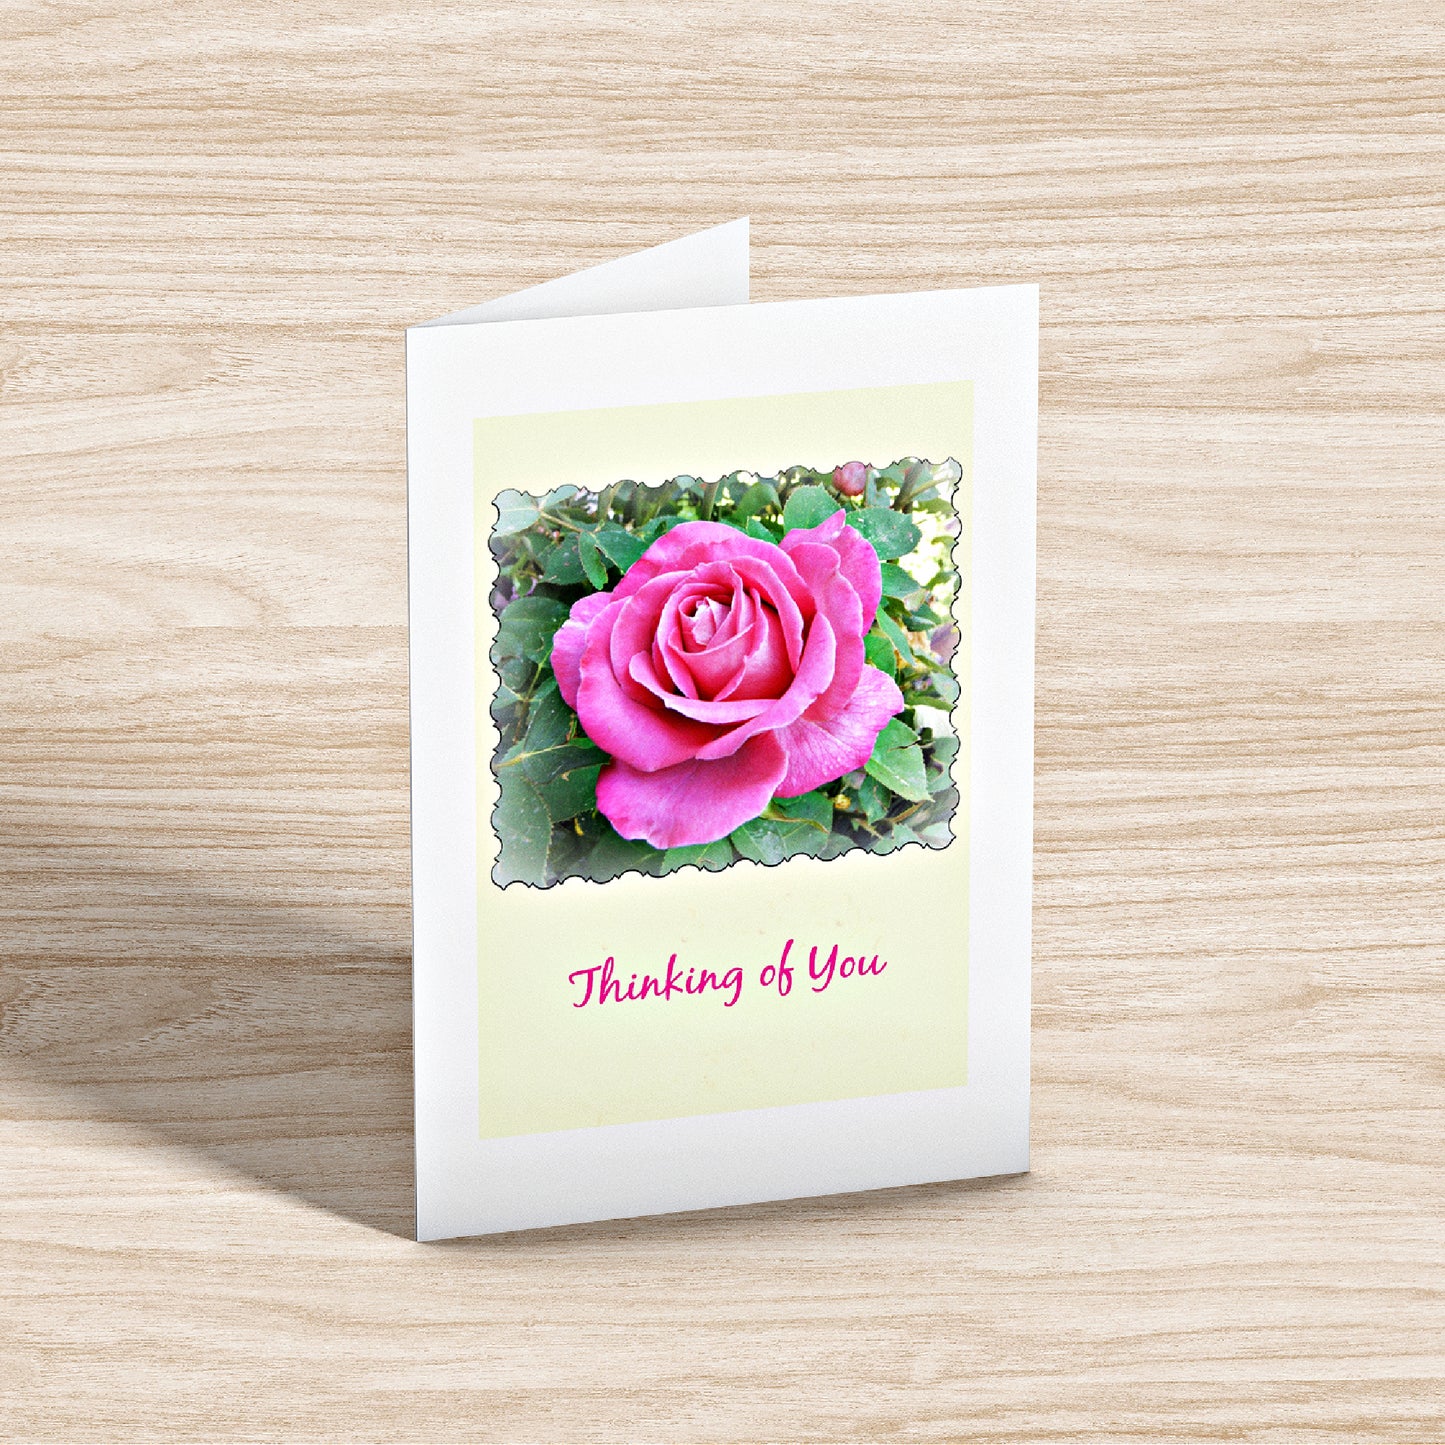 Mock up of our "Thinking of You" card standing on a wooden surface